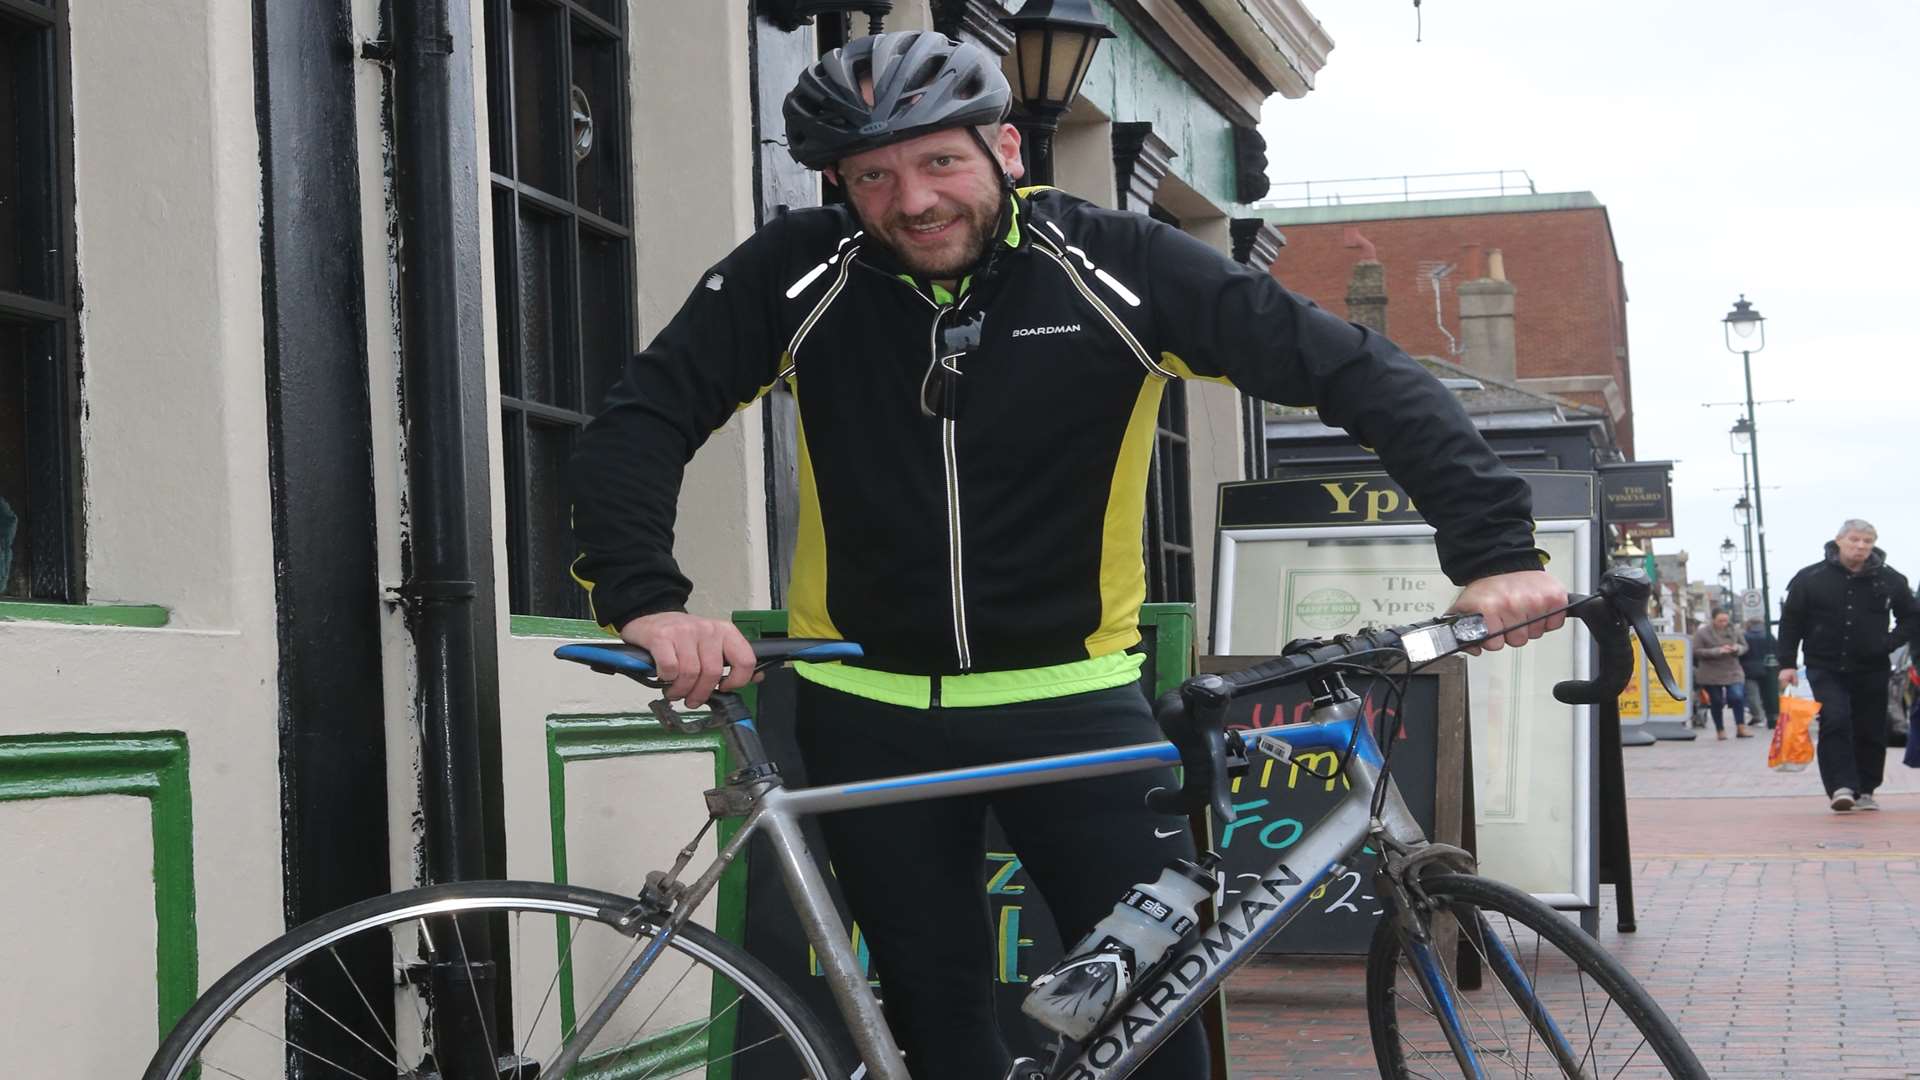 Martin Wackenier from Kemsley outside of Ypres Tavern in Sittingbourne where he will start his 200 mile cycling return trip to Ypres to raise money for Parkinson's UK